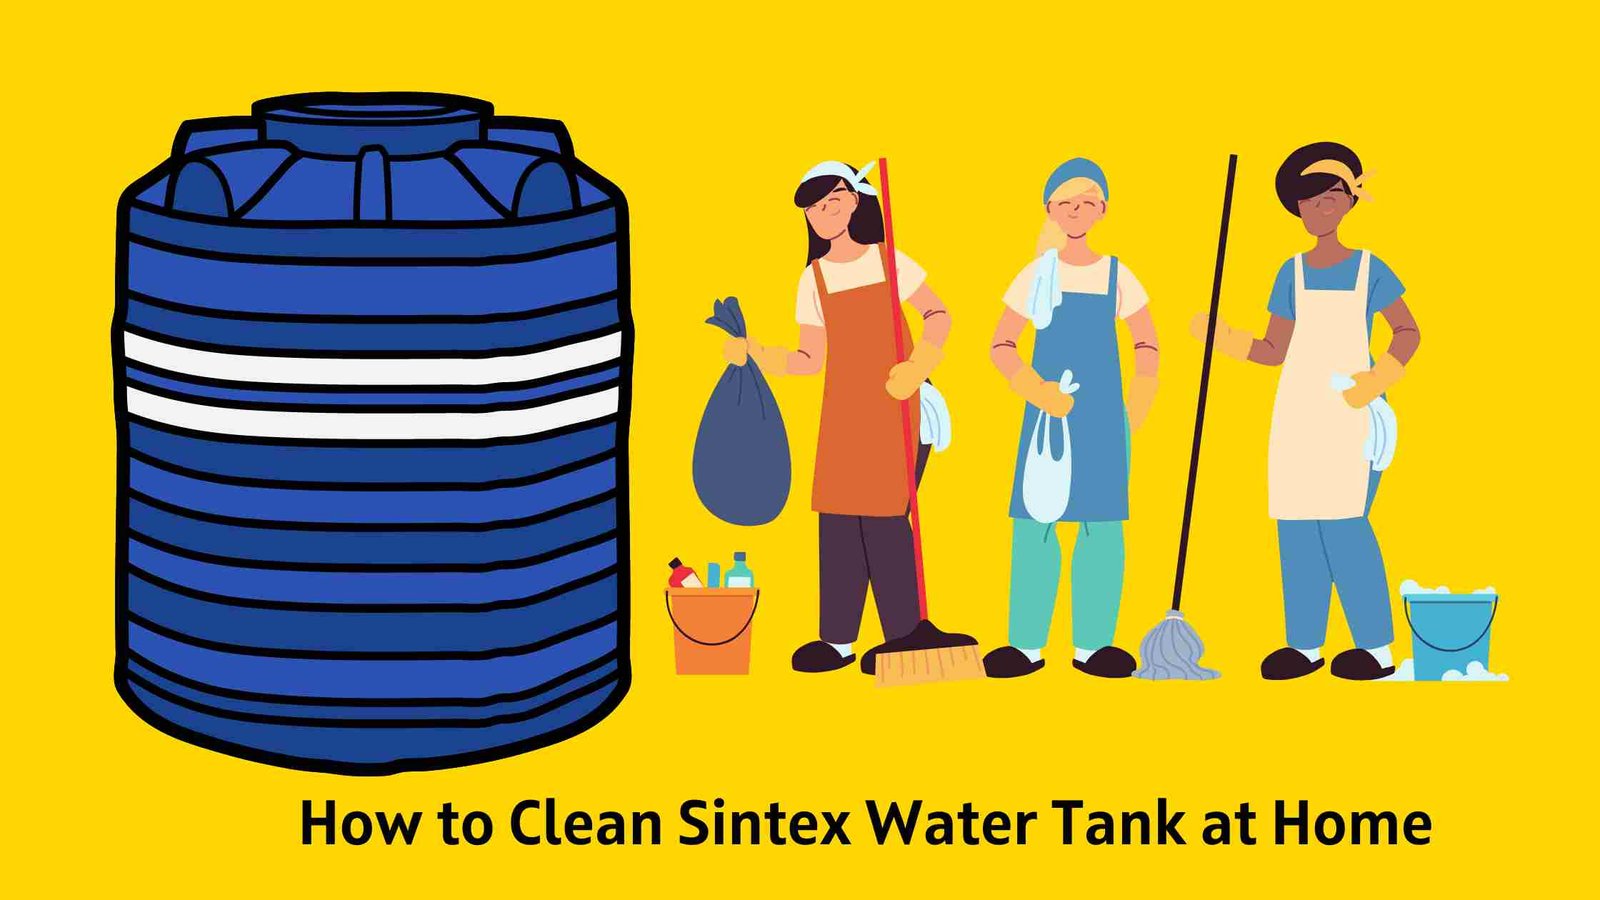 How to Clean Sintex Water Tank at Home